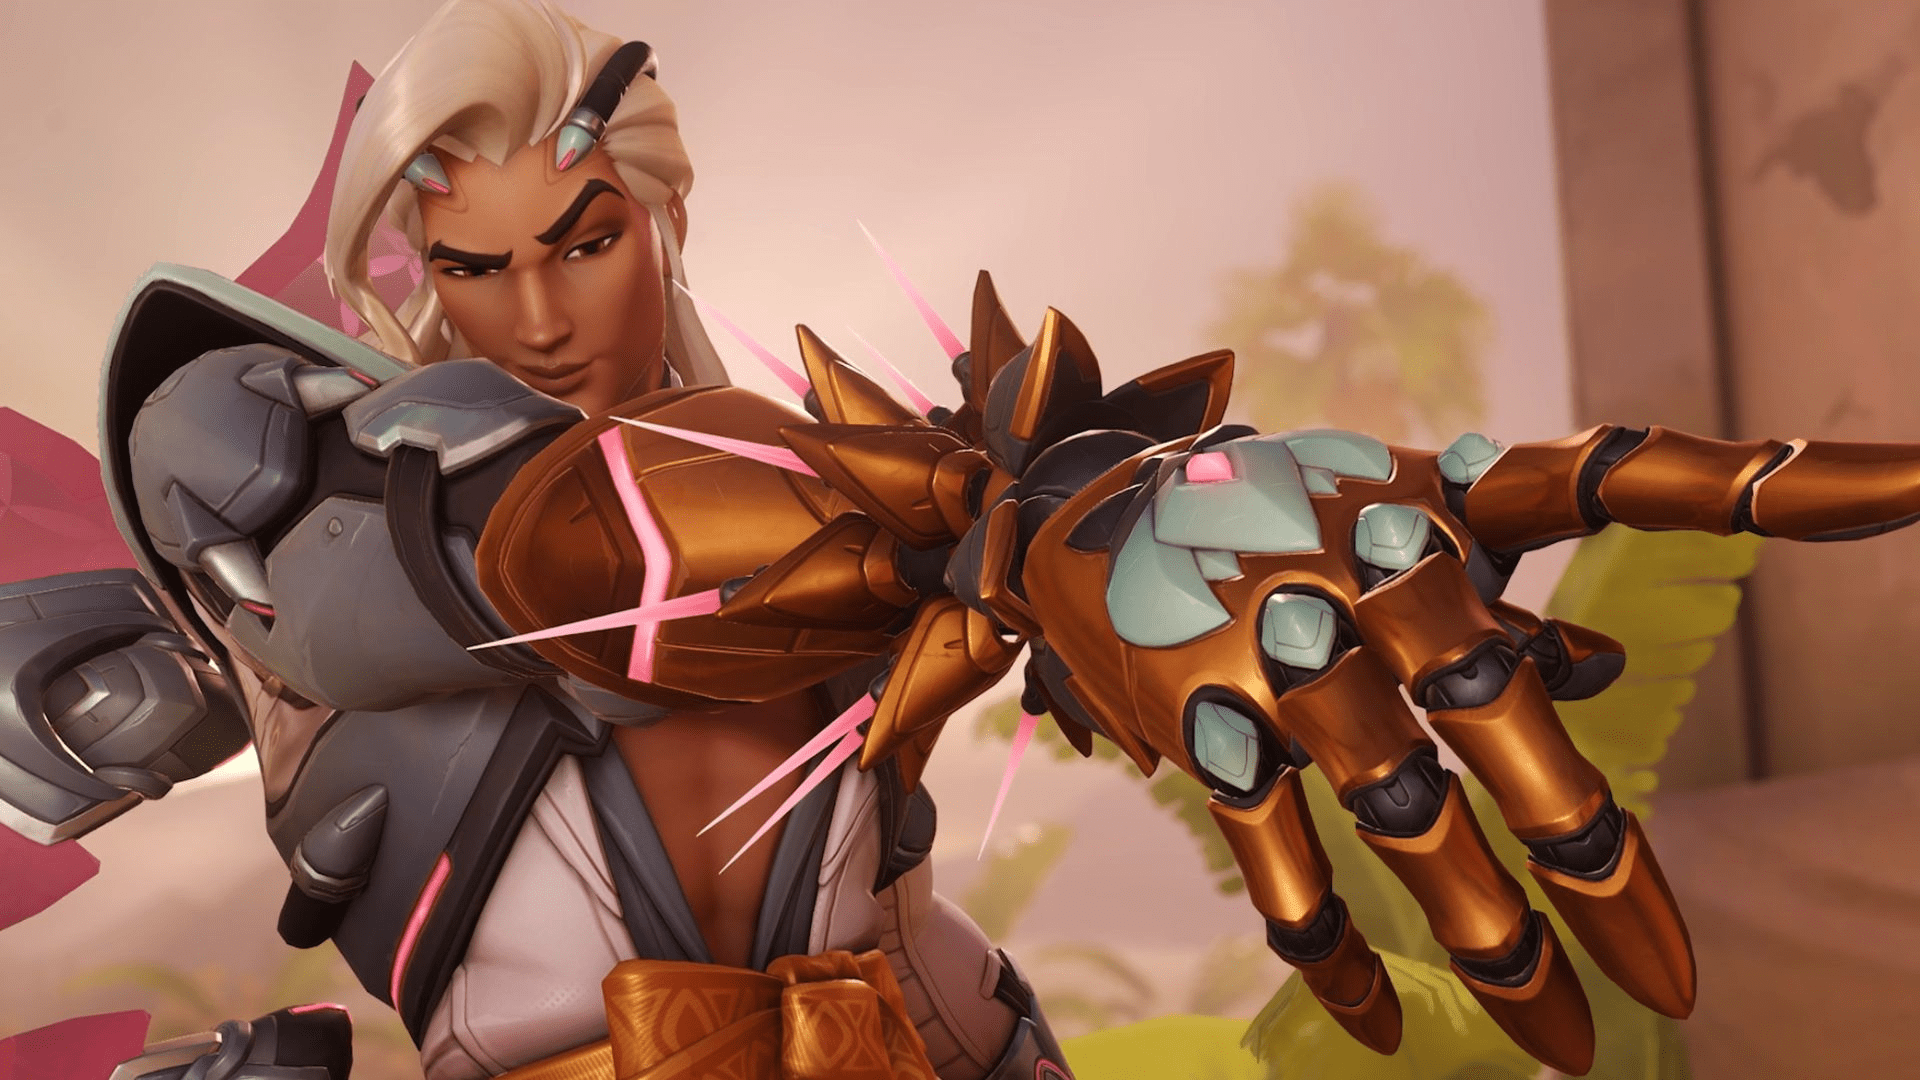 overwatch LGBTQ characters